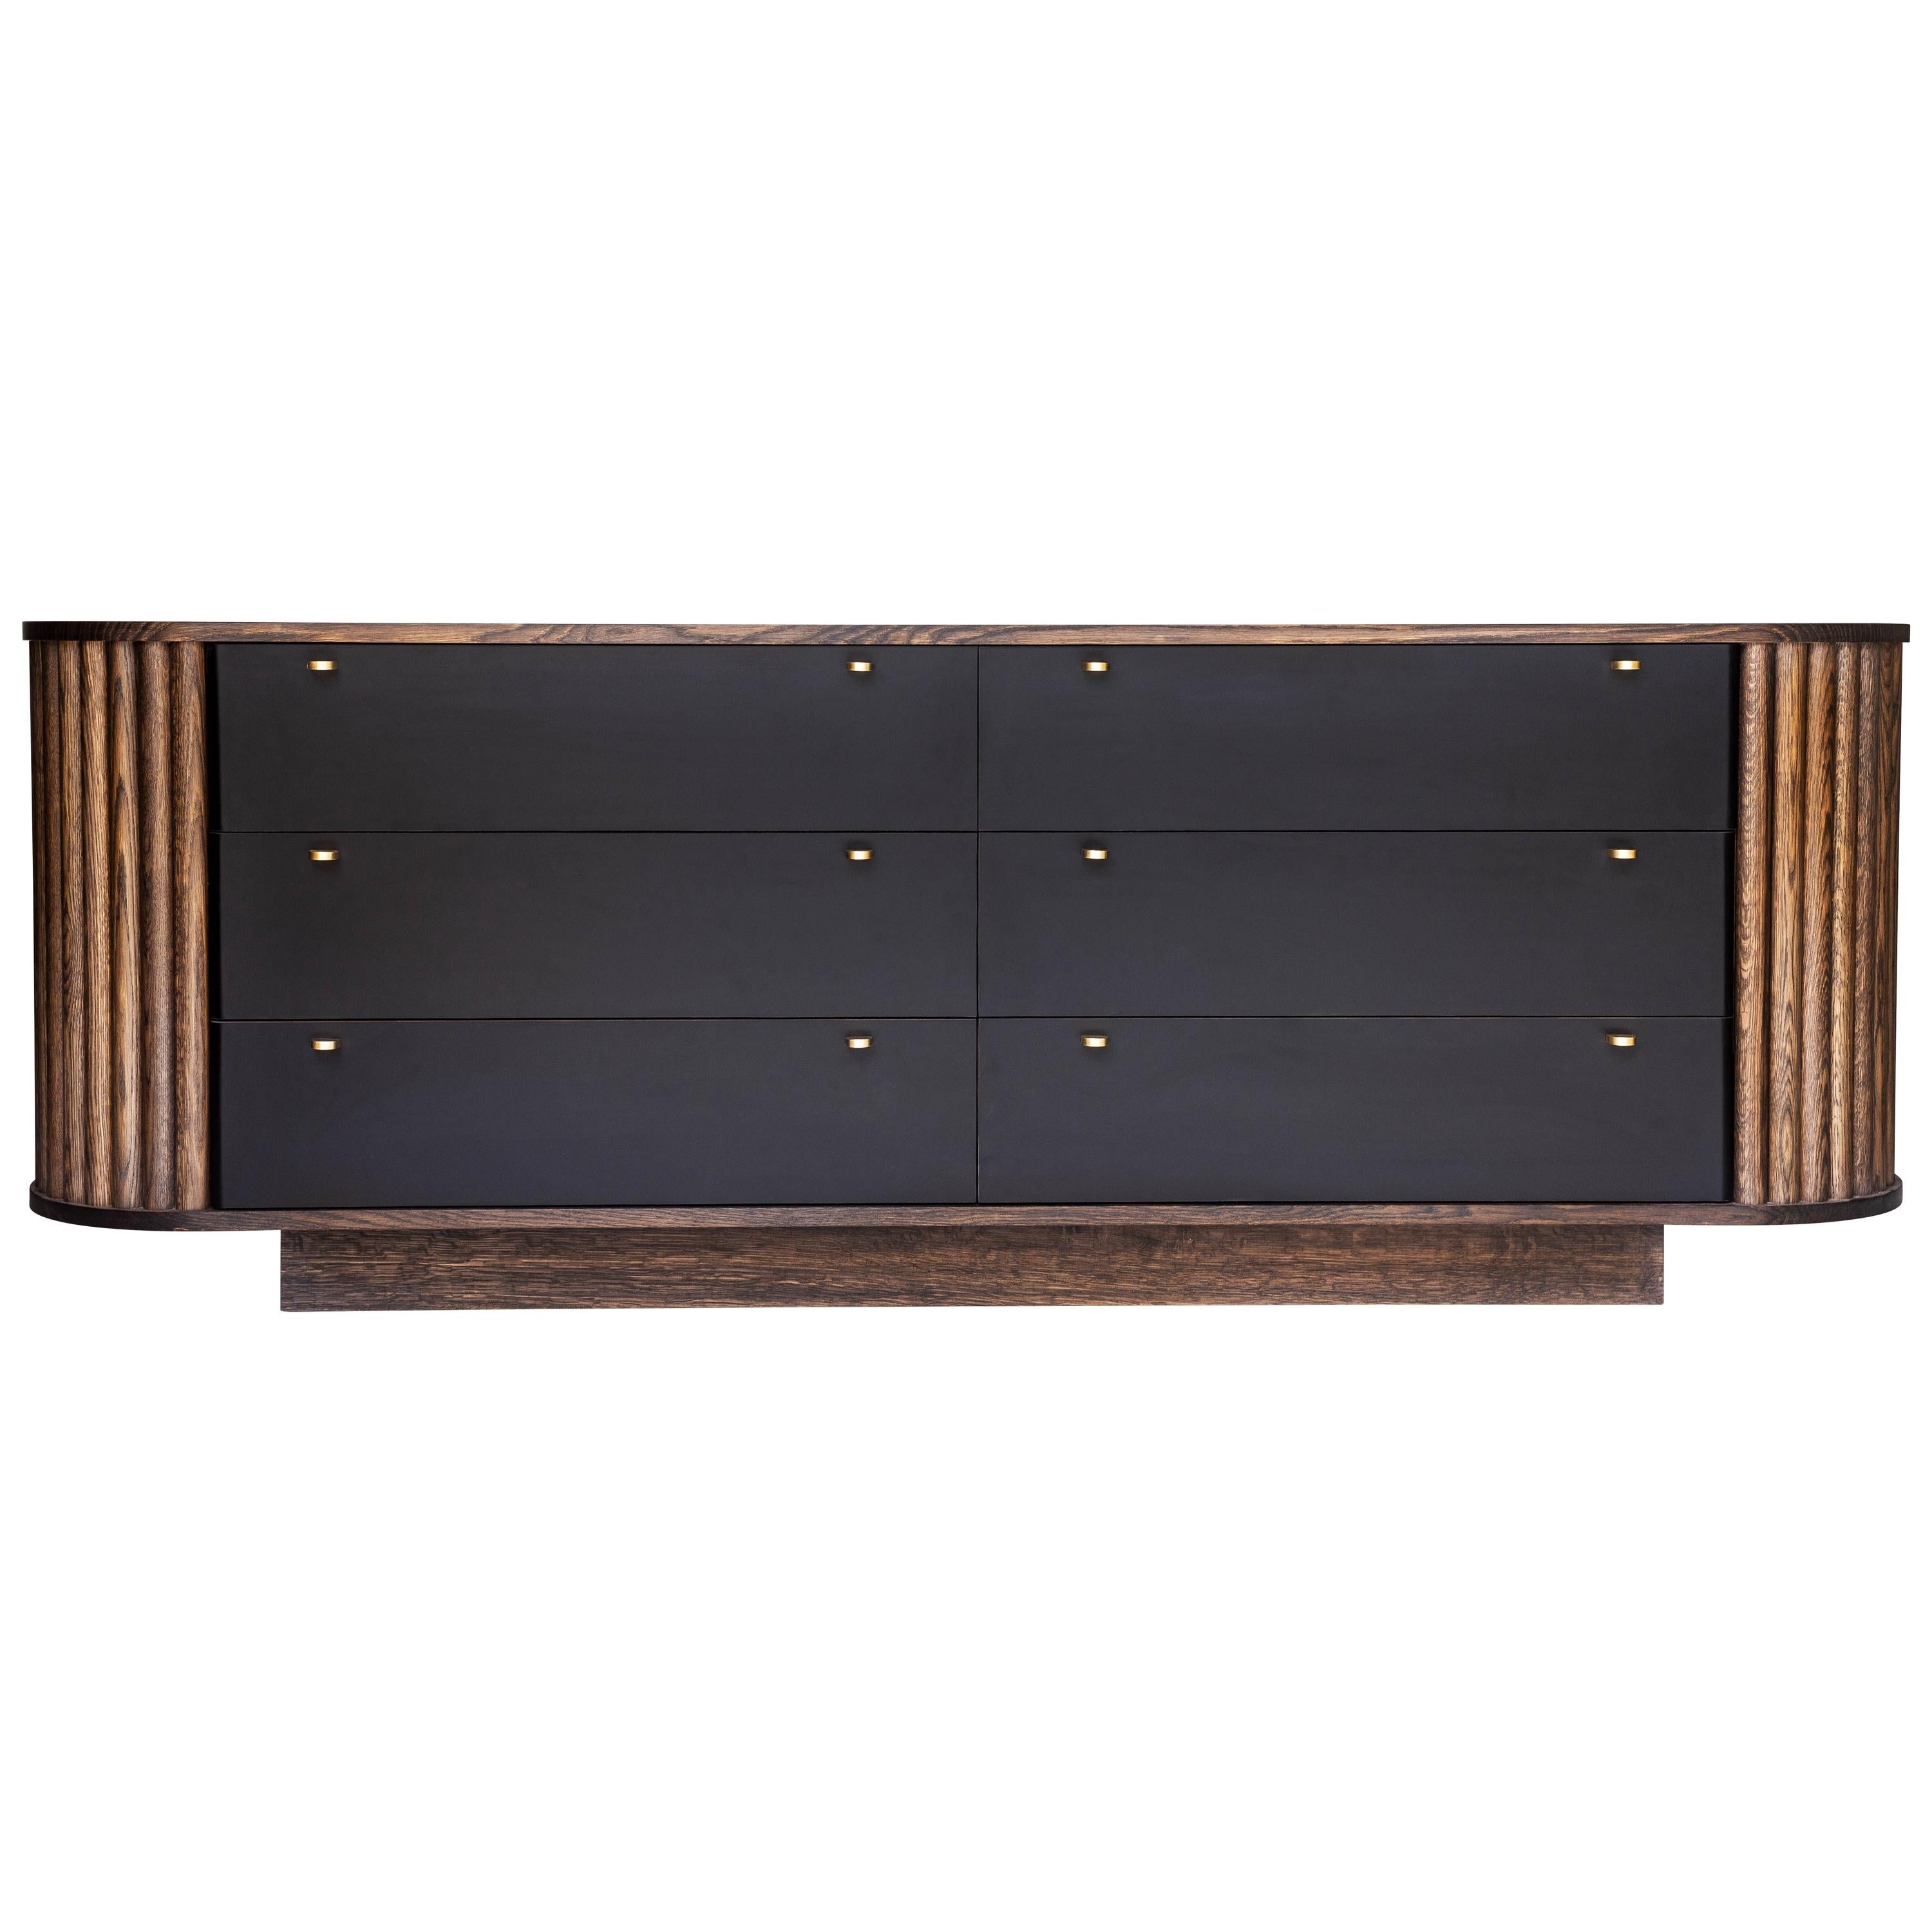 "Deborah Lea" Dresser / Credenza, with Leather and Brass accents by Kate Duncan  For Sale